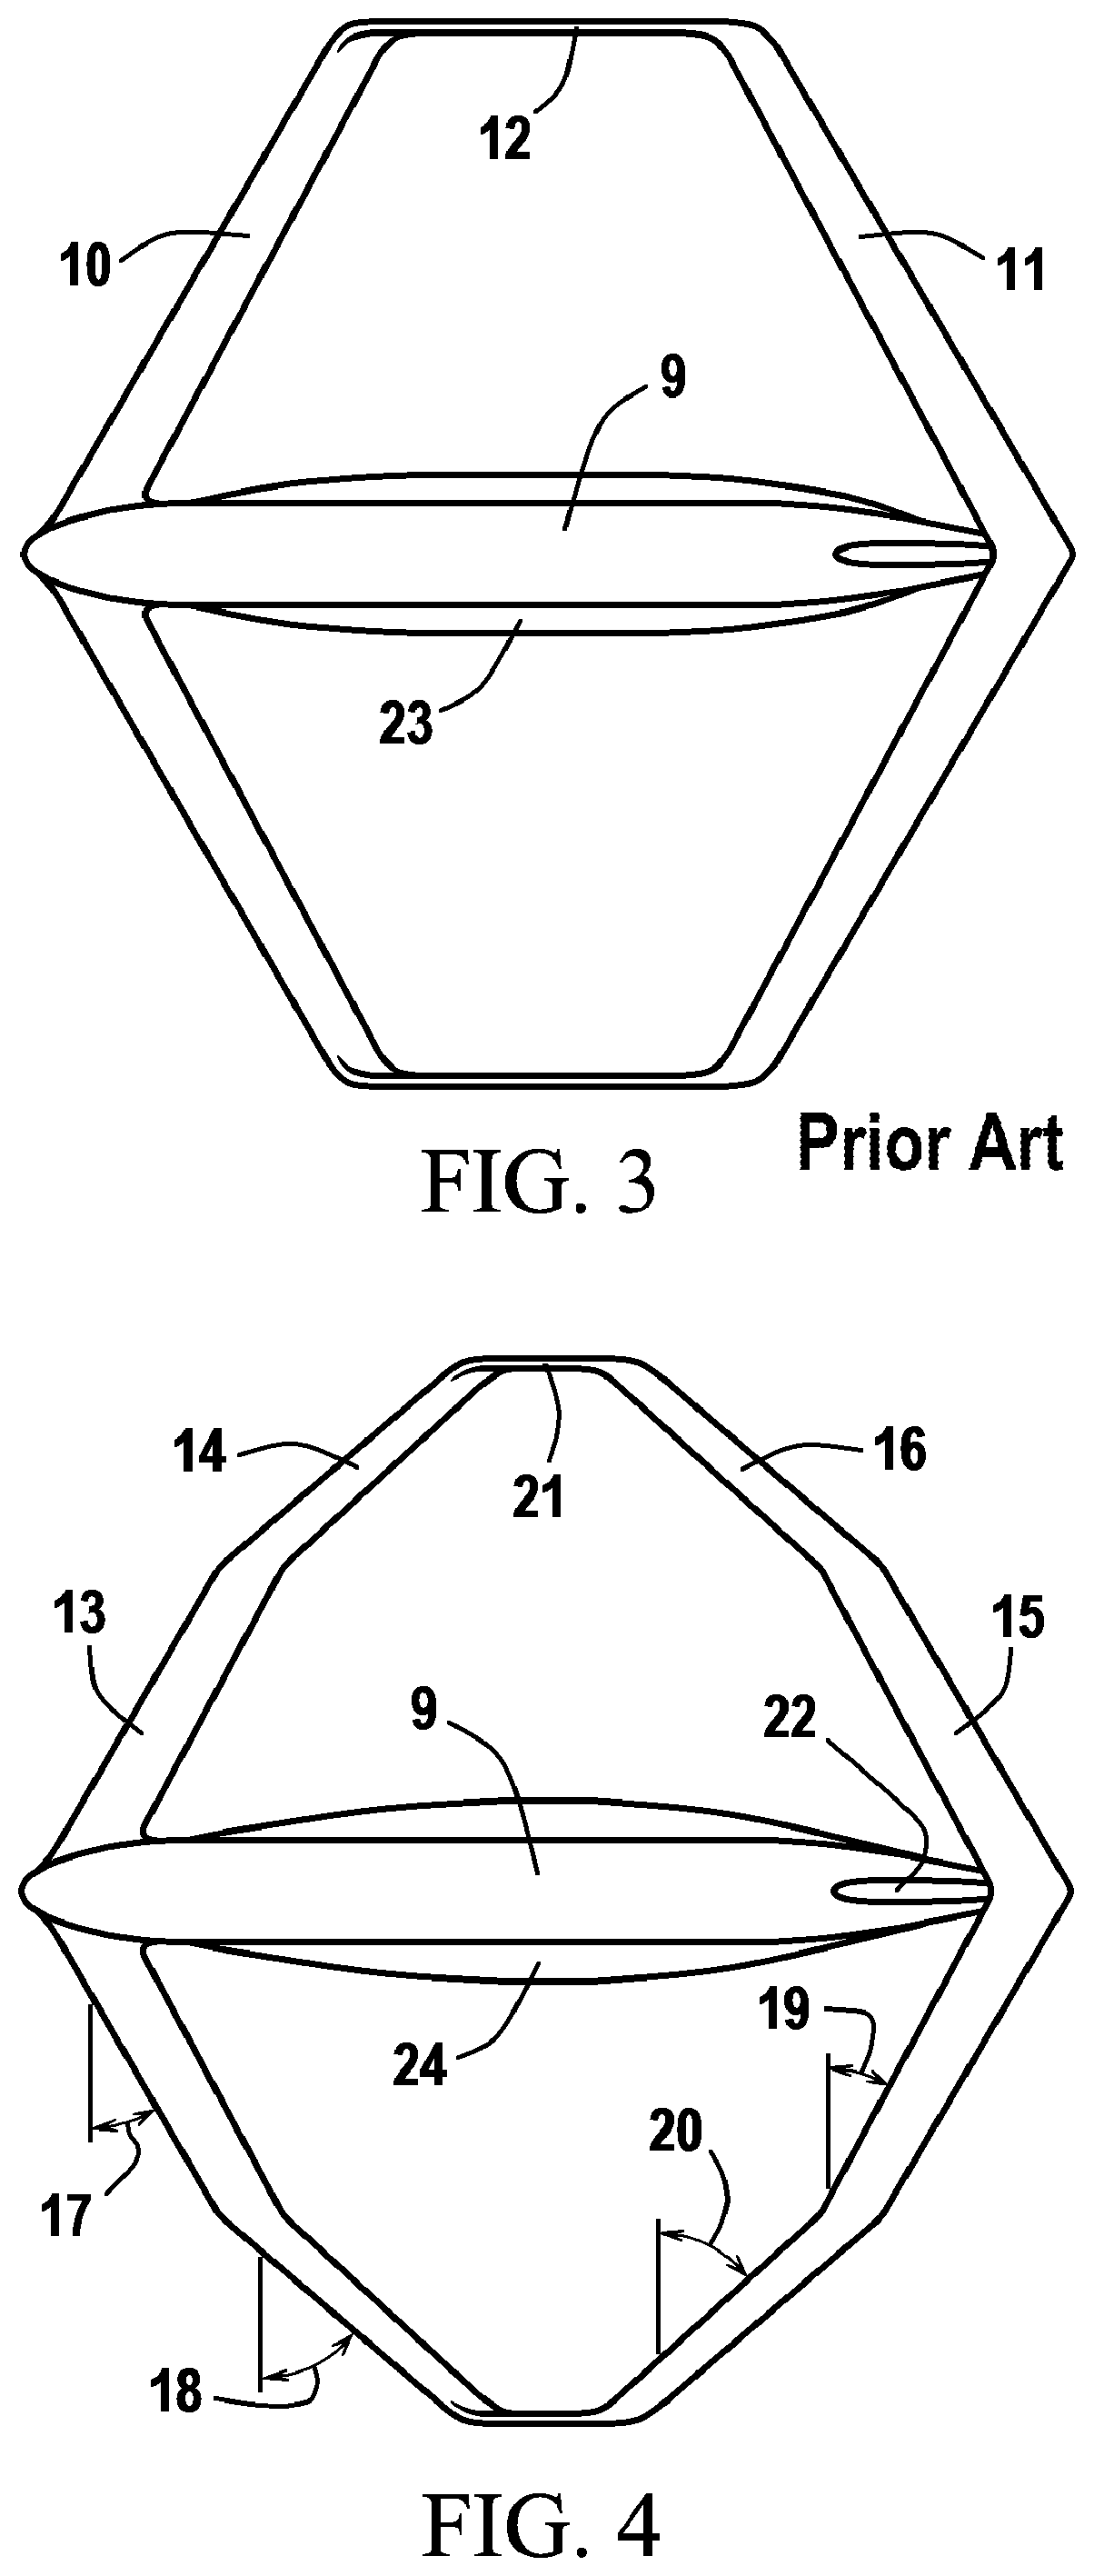 Methods for improvements of the box wing aircraft concept and corresponding aircraft configuration